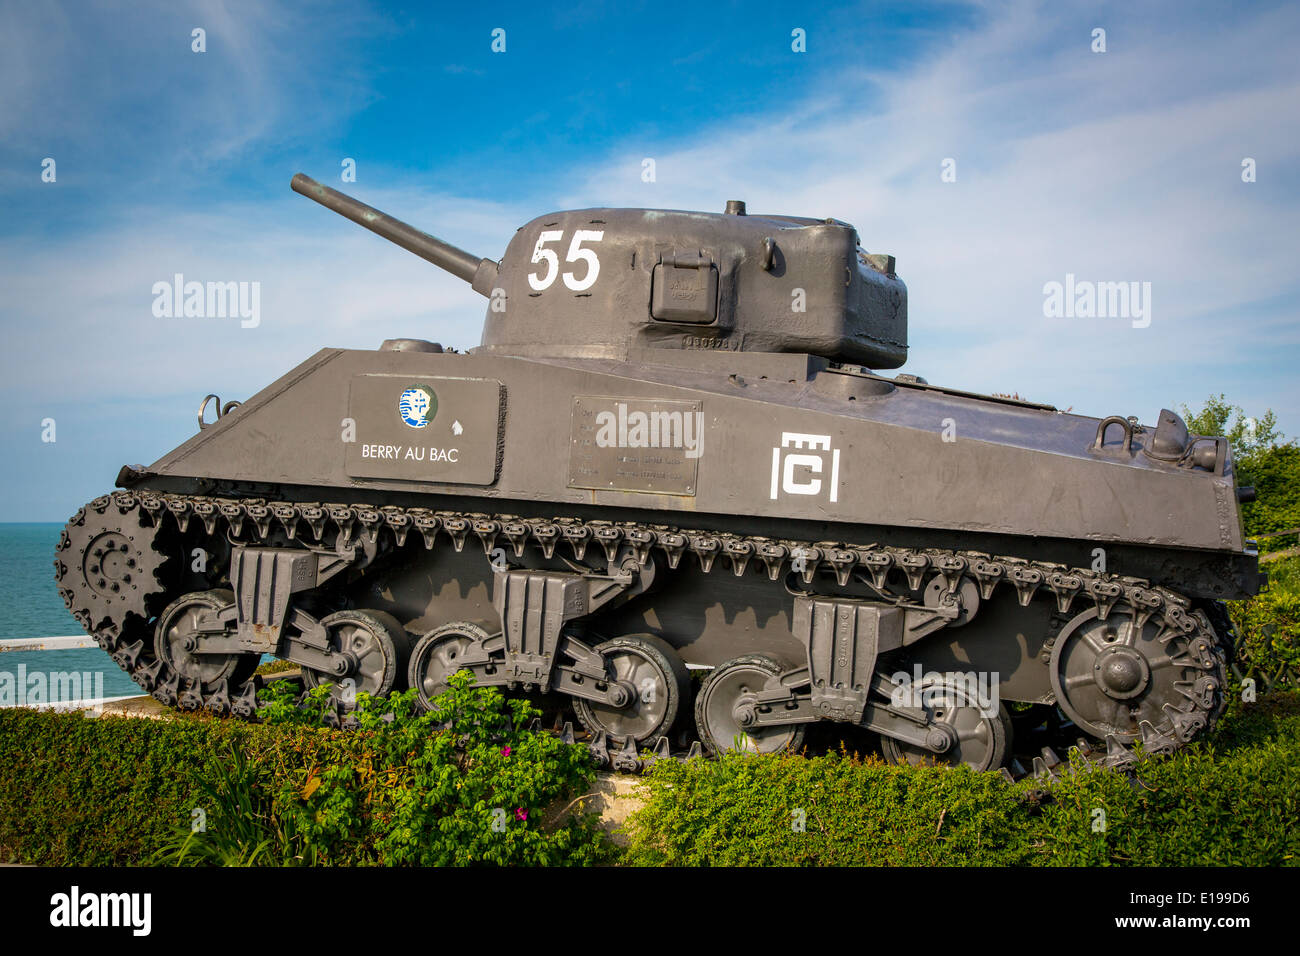 US Army Sherman tank on display along the Normandy coast at Arromanches-les-Bains, France Stock Photo